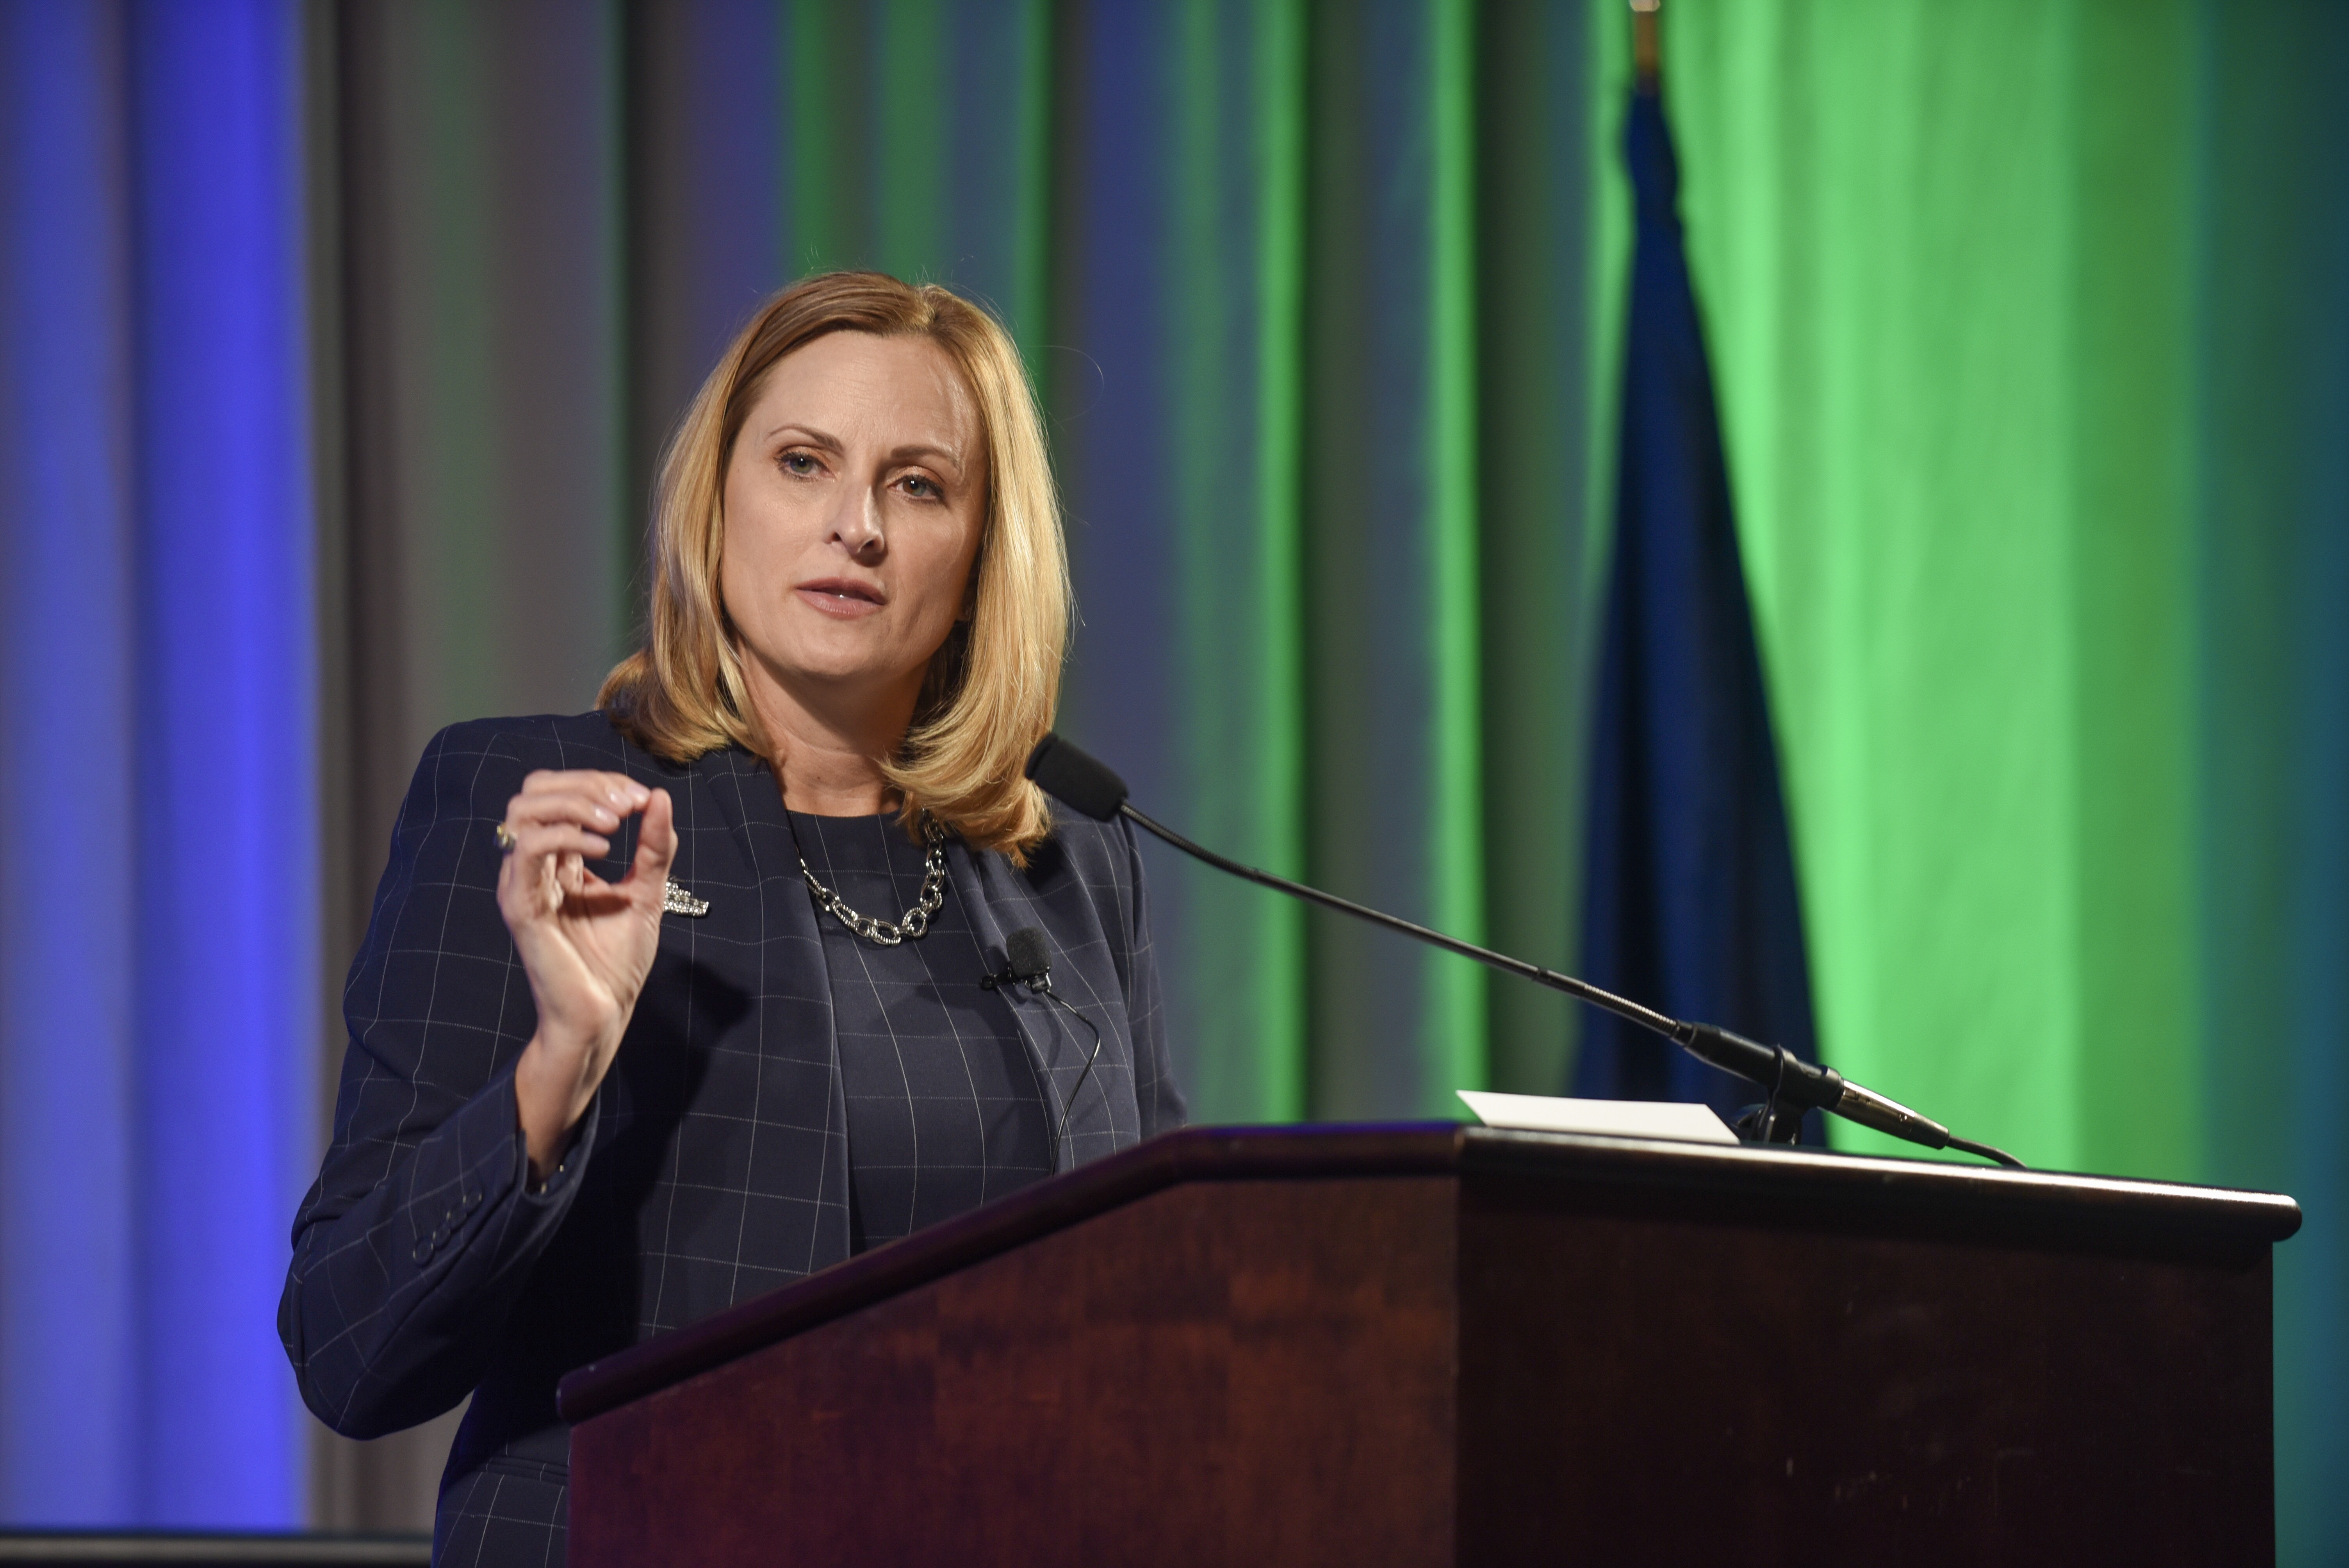 Port NOLA President and CEO Highlights Record Volumes and Bold Vision for the Future in the 2019 State of the Port Address